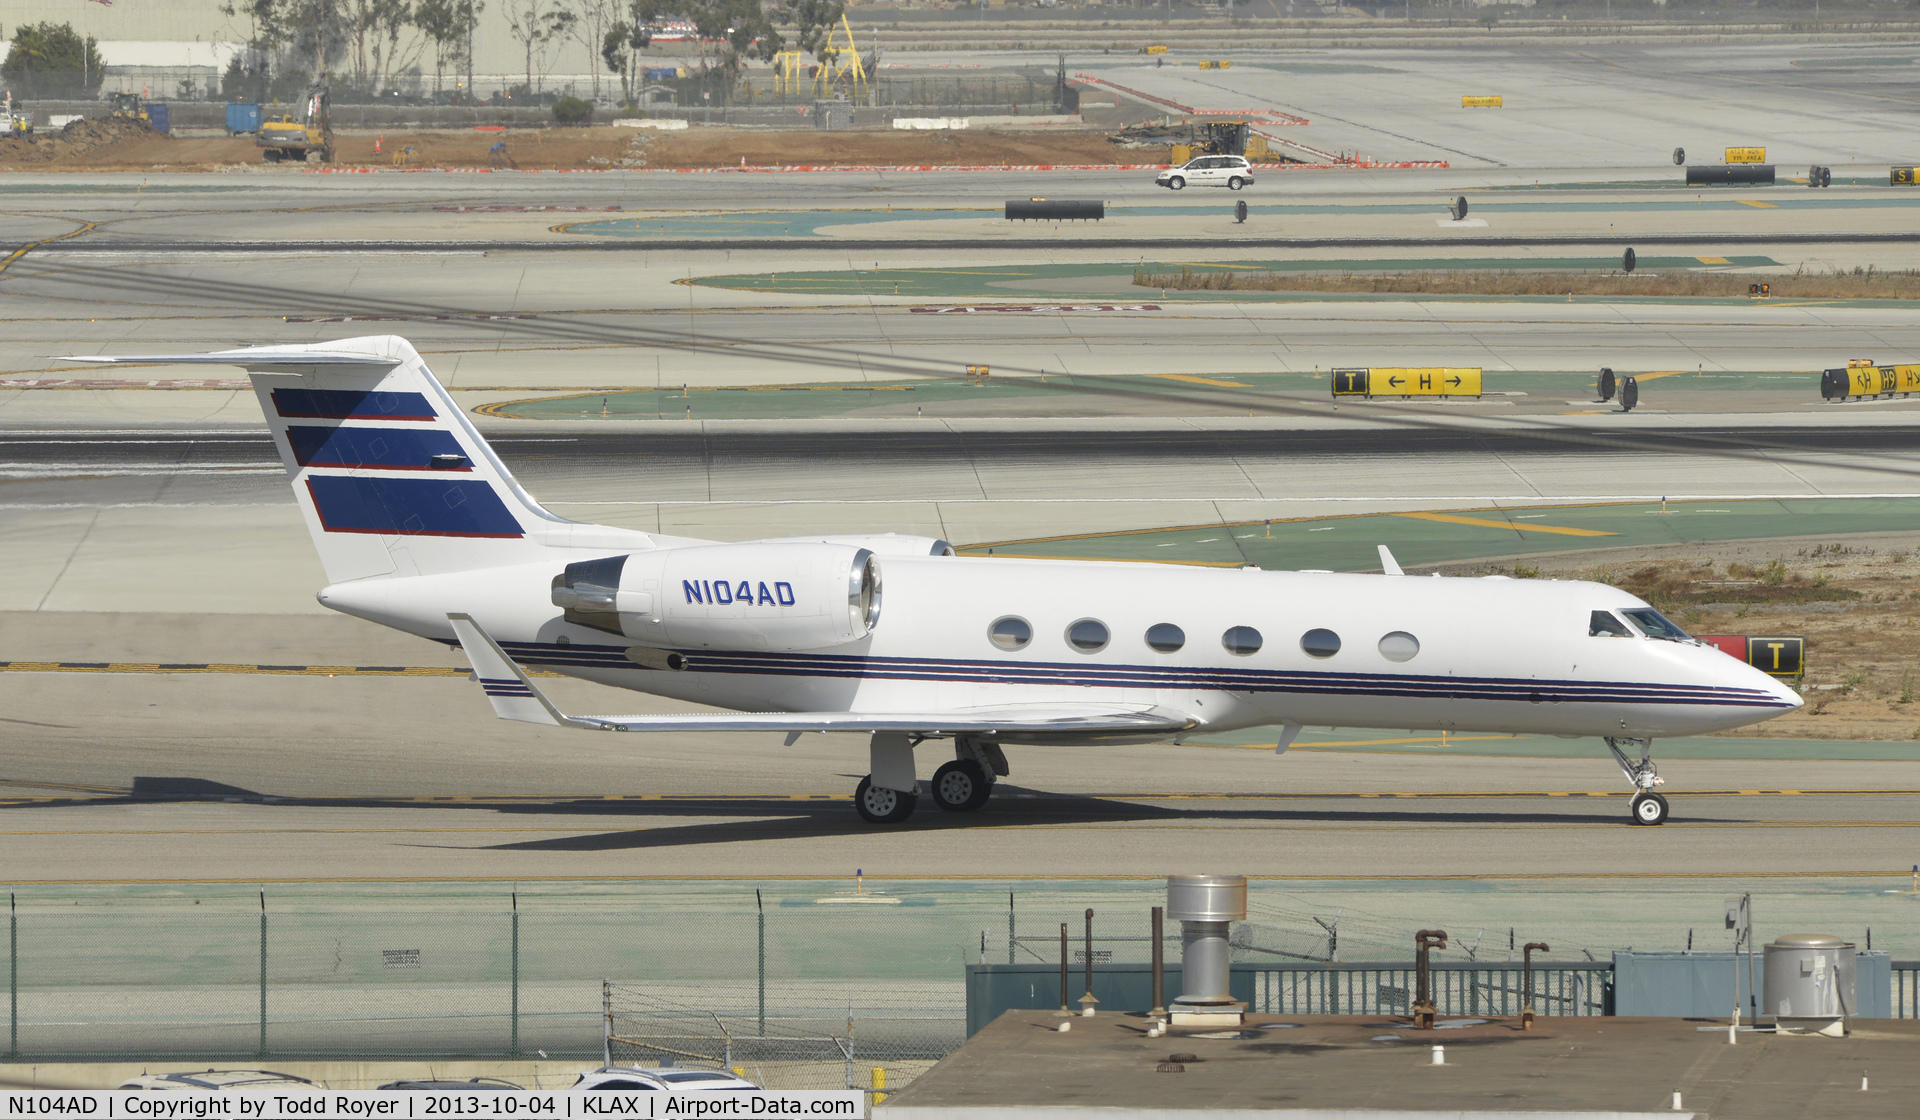 N104AD, 2000 Gulfstream Aerospace G-IV C/N 1406, Taxiing to parking at LAX